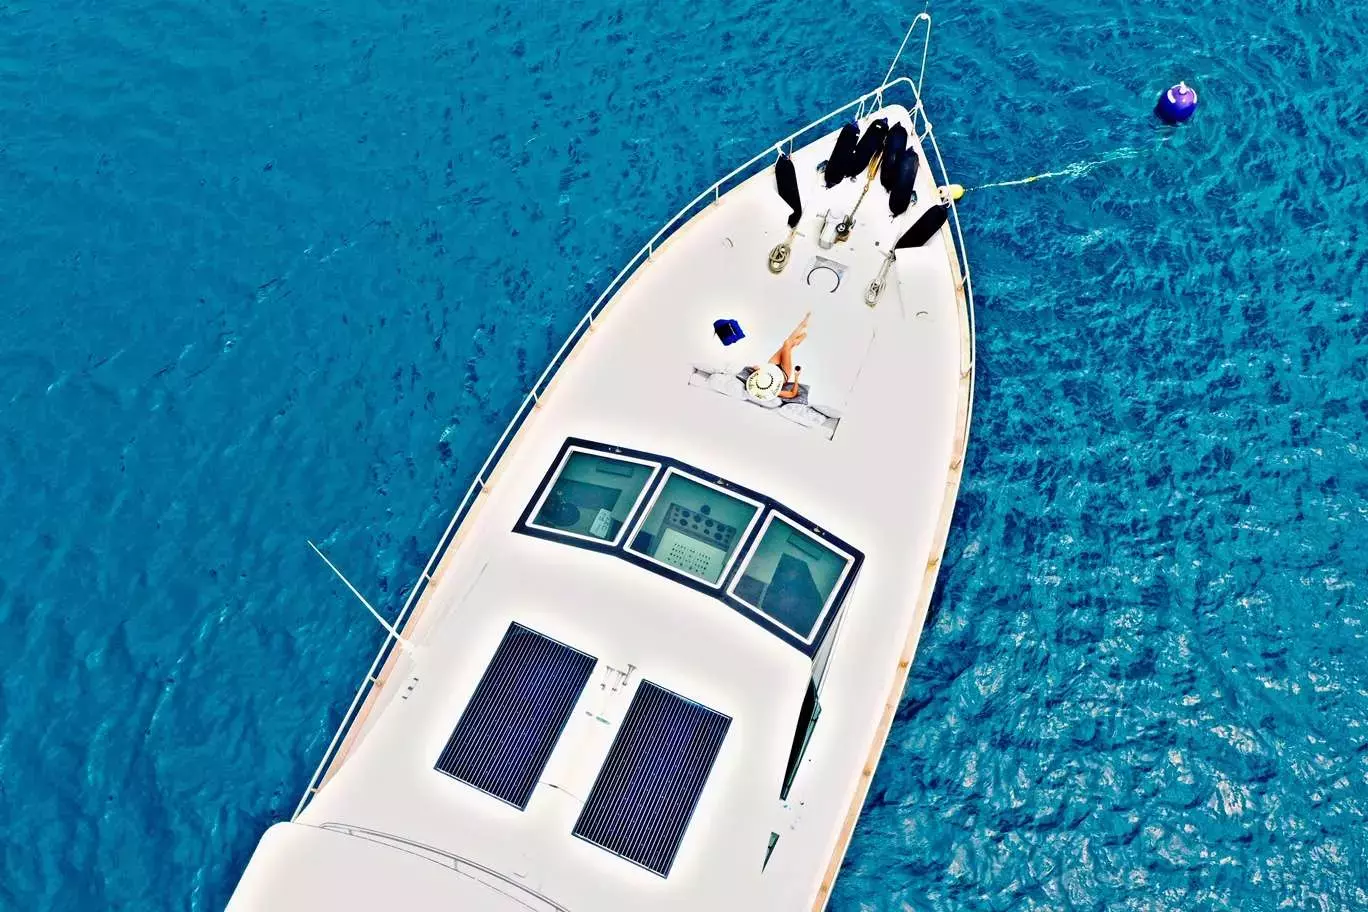 Runaway by Azimut - Top rates for a Charter of a private Motor Yacht in Puerto Rico